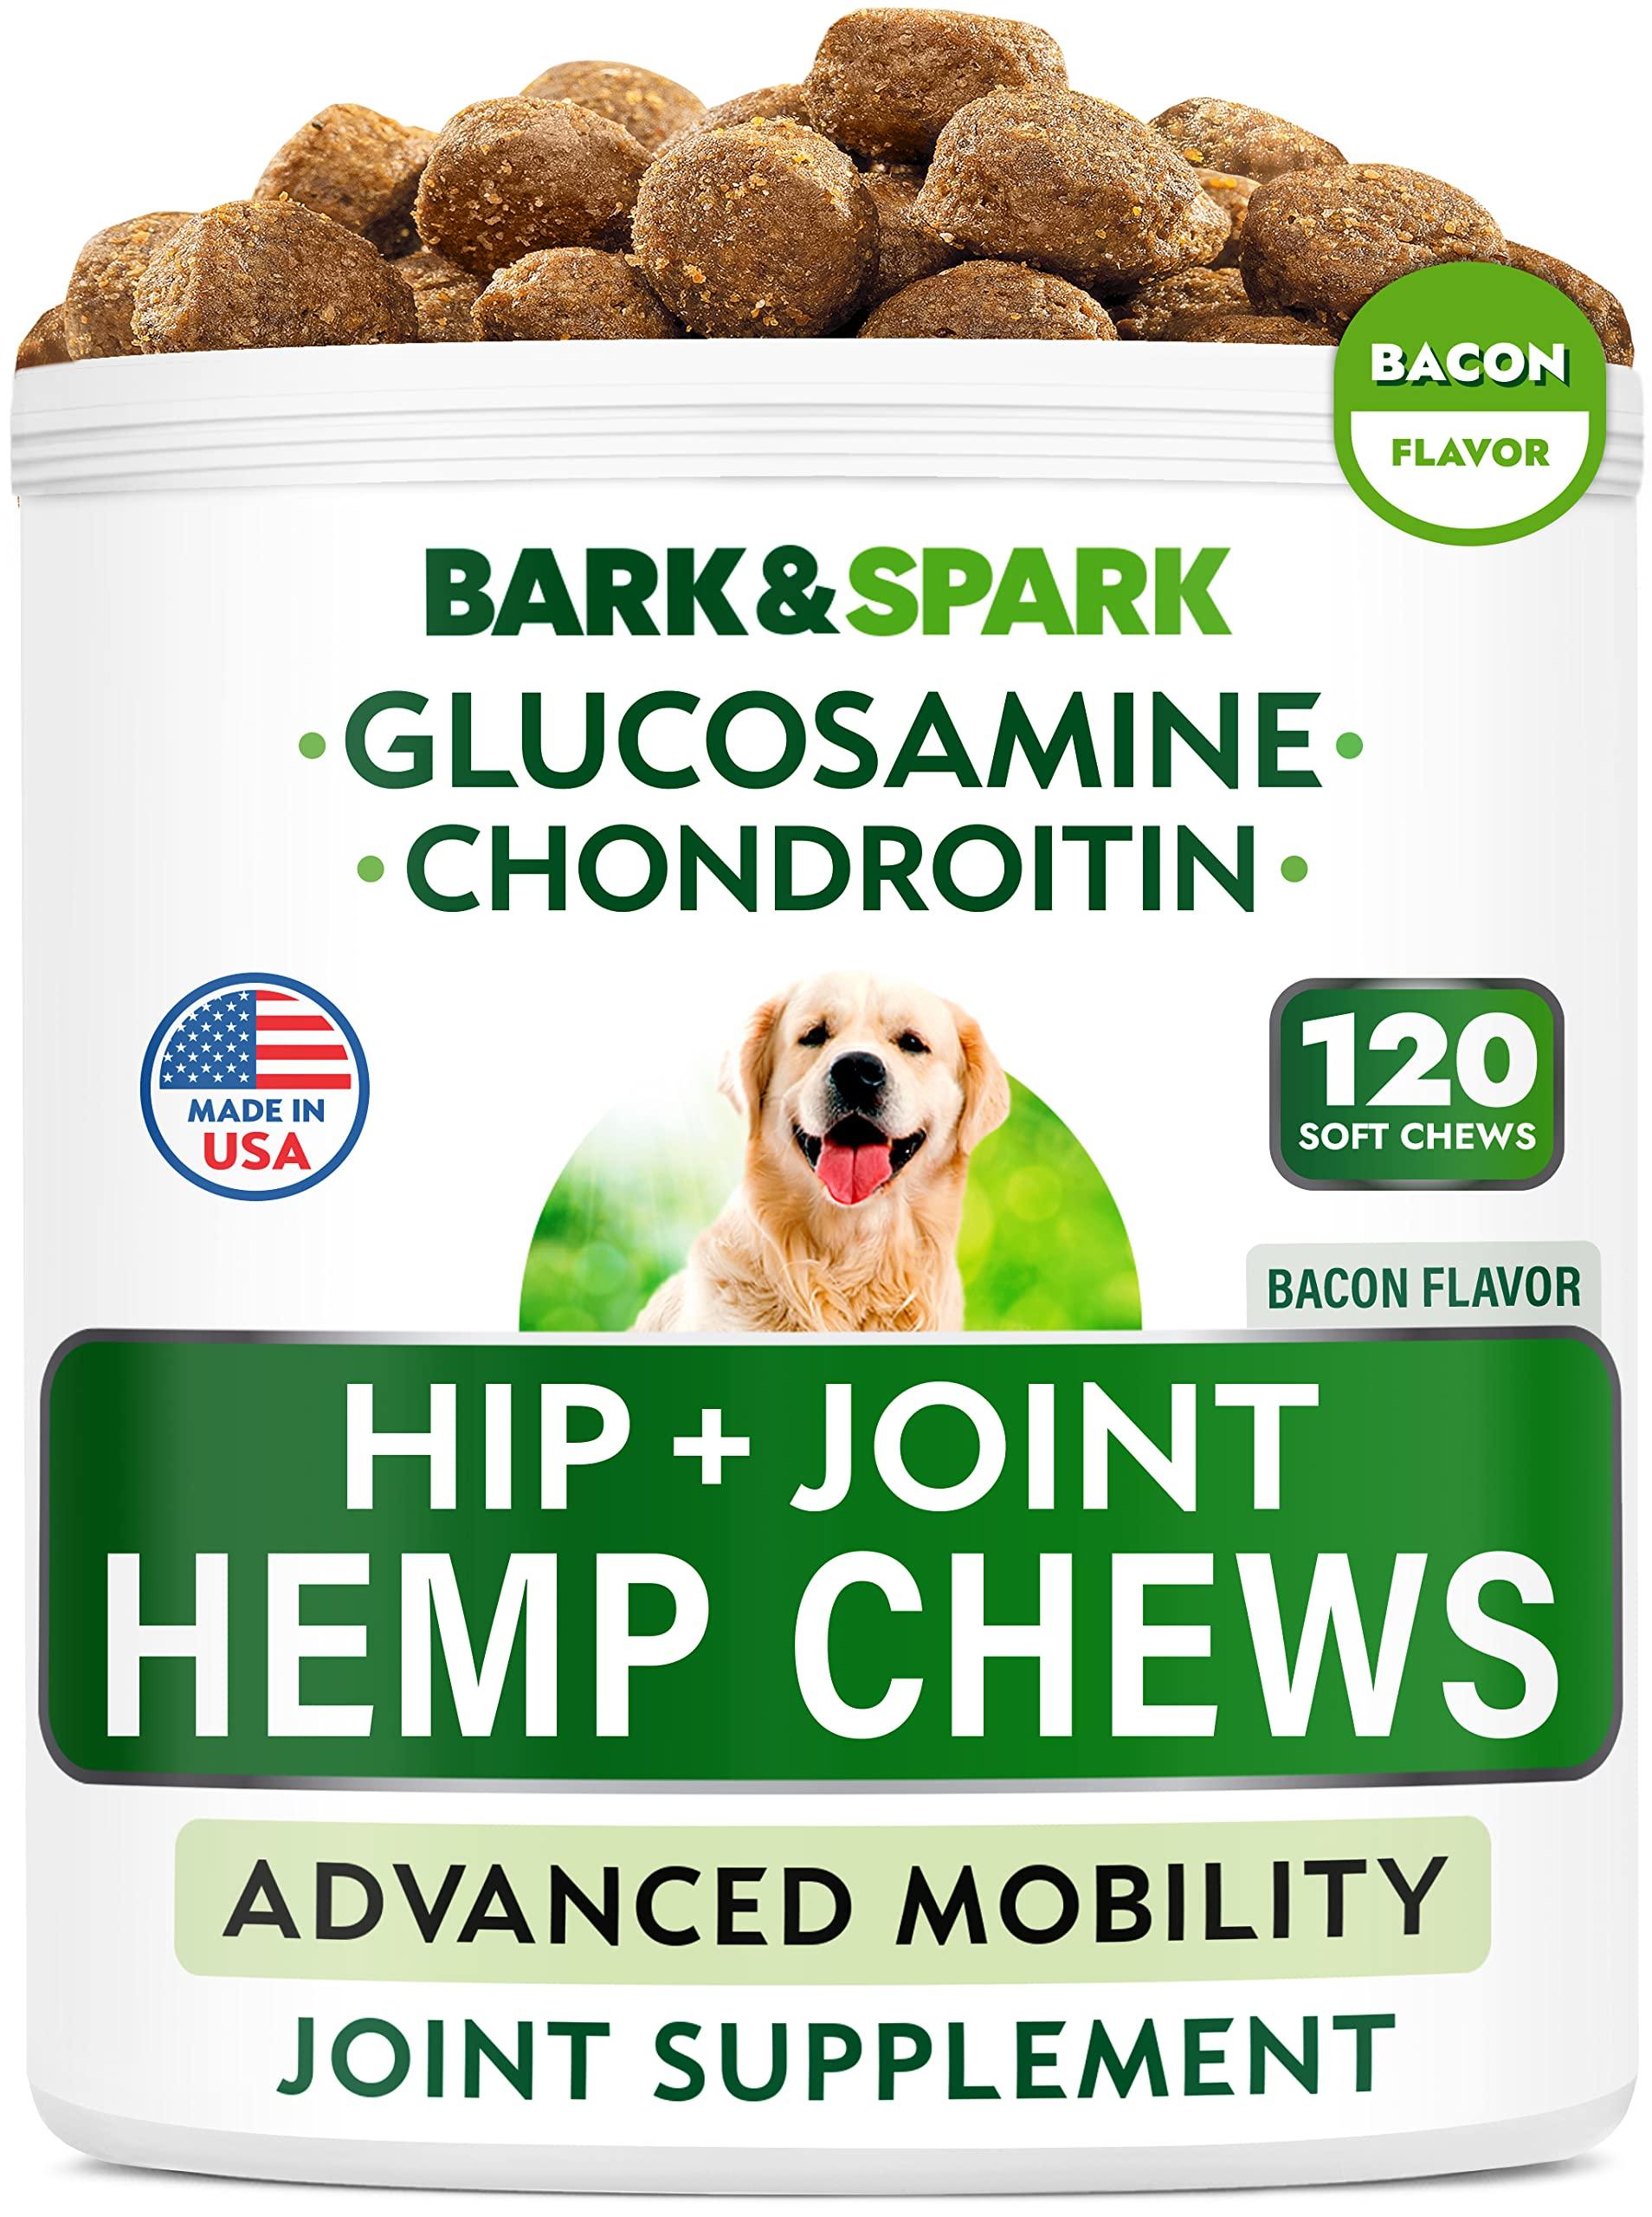 BARK&SPARK Hemp Treats + Glucosamine - Natural Joint Pain Relief - Hip & Joint Supplement w/MSM + Chondroitin + Hemp Oil + Omega 3 - Joint Pain Relief - Made in USA - Bacon Flavor - 120 Chews